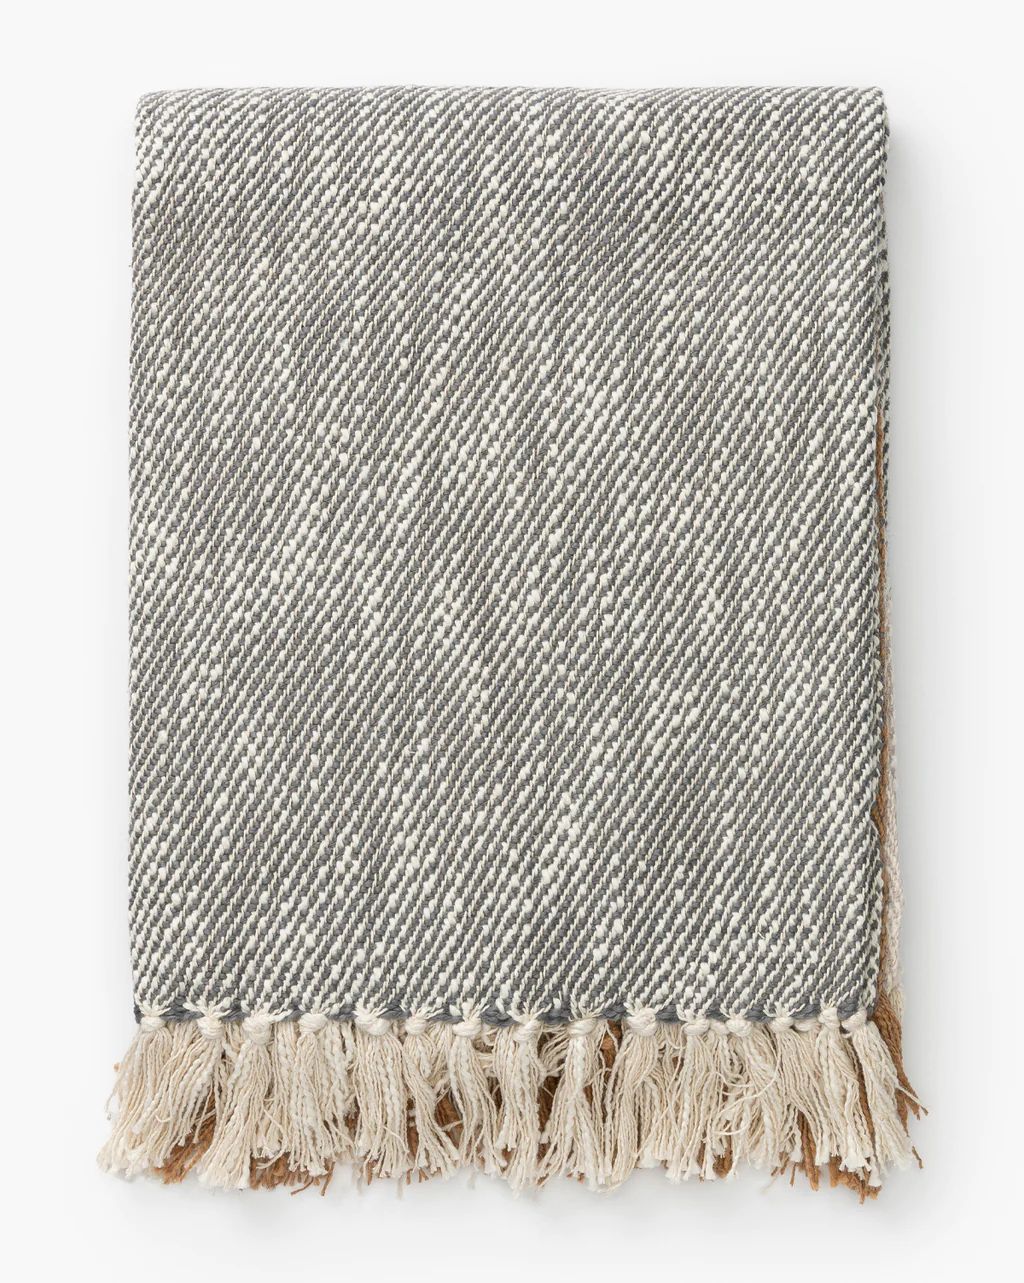 Roberts Cotton Fringed Throw | McGee & Co.